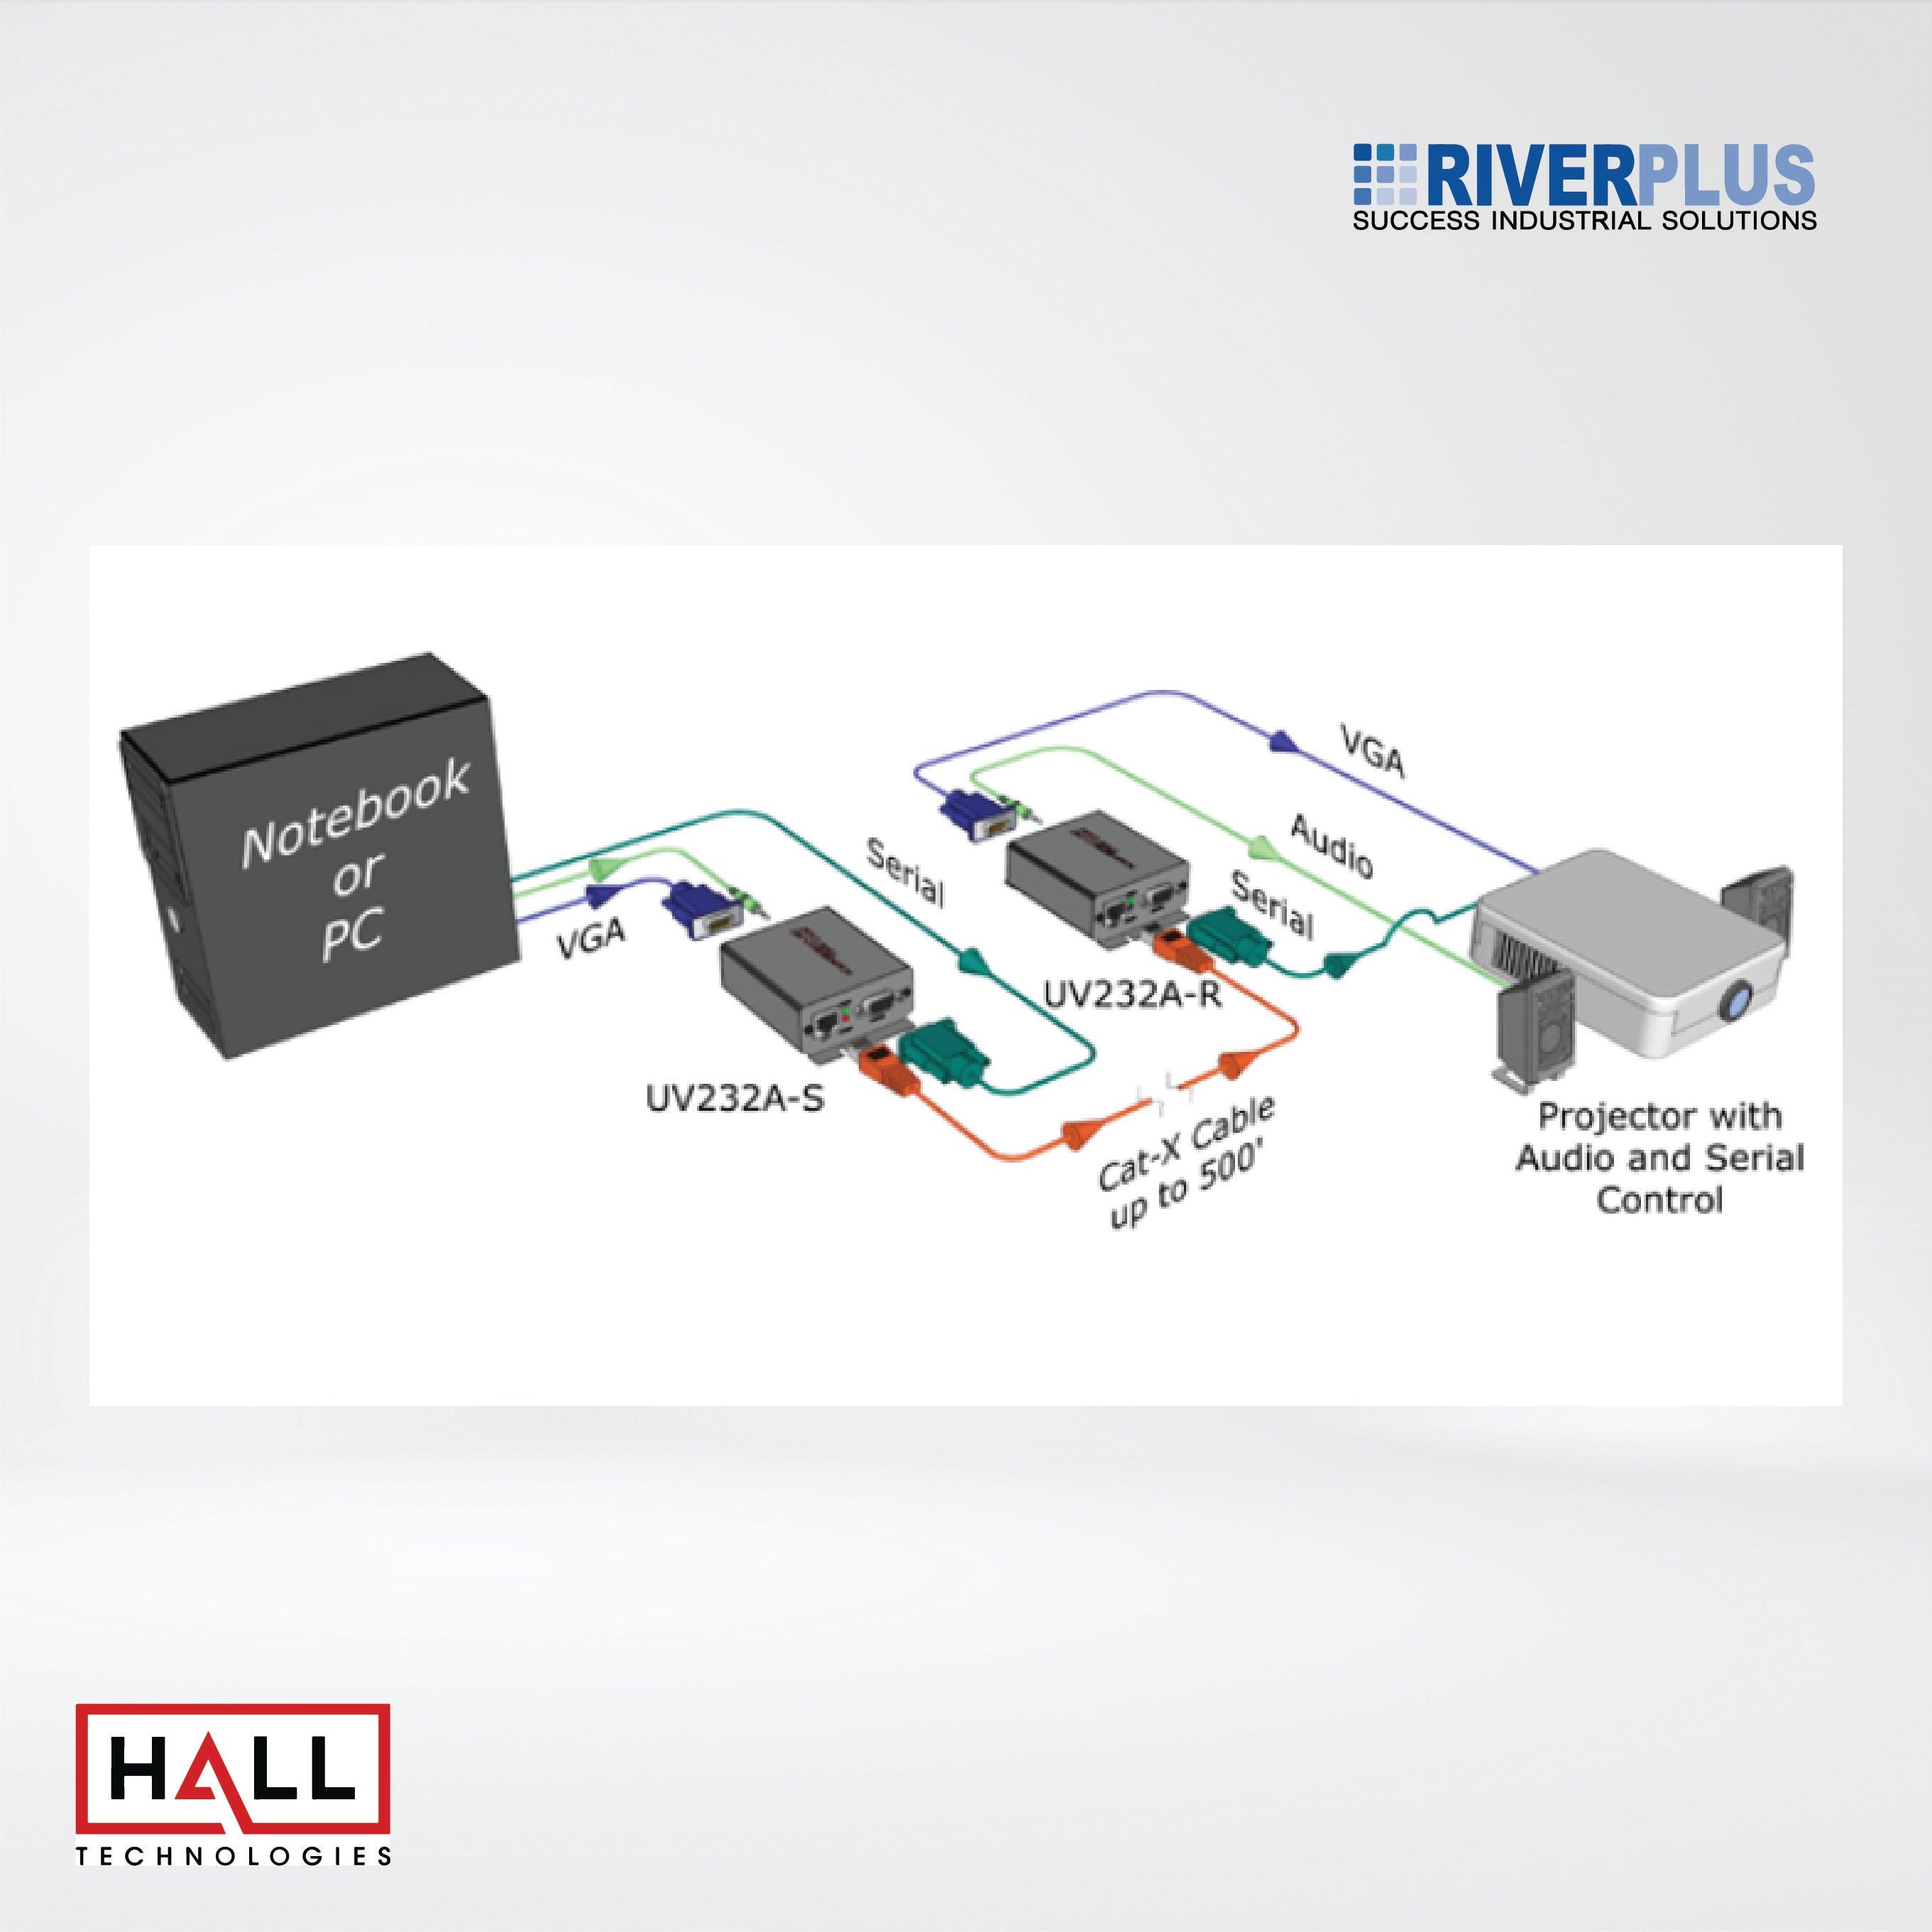 UV232A-R VGA, Audio and Uni-Directional RS-232 Receiver - Riverplus